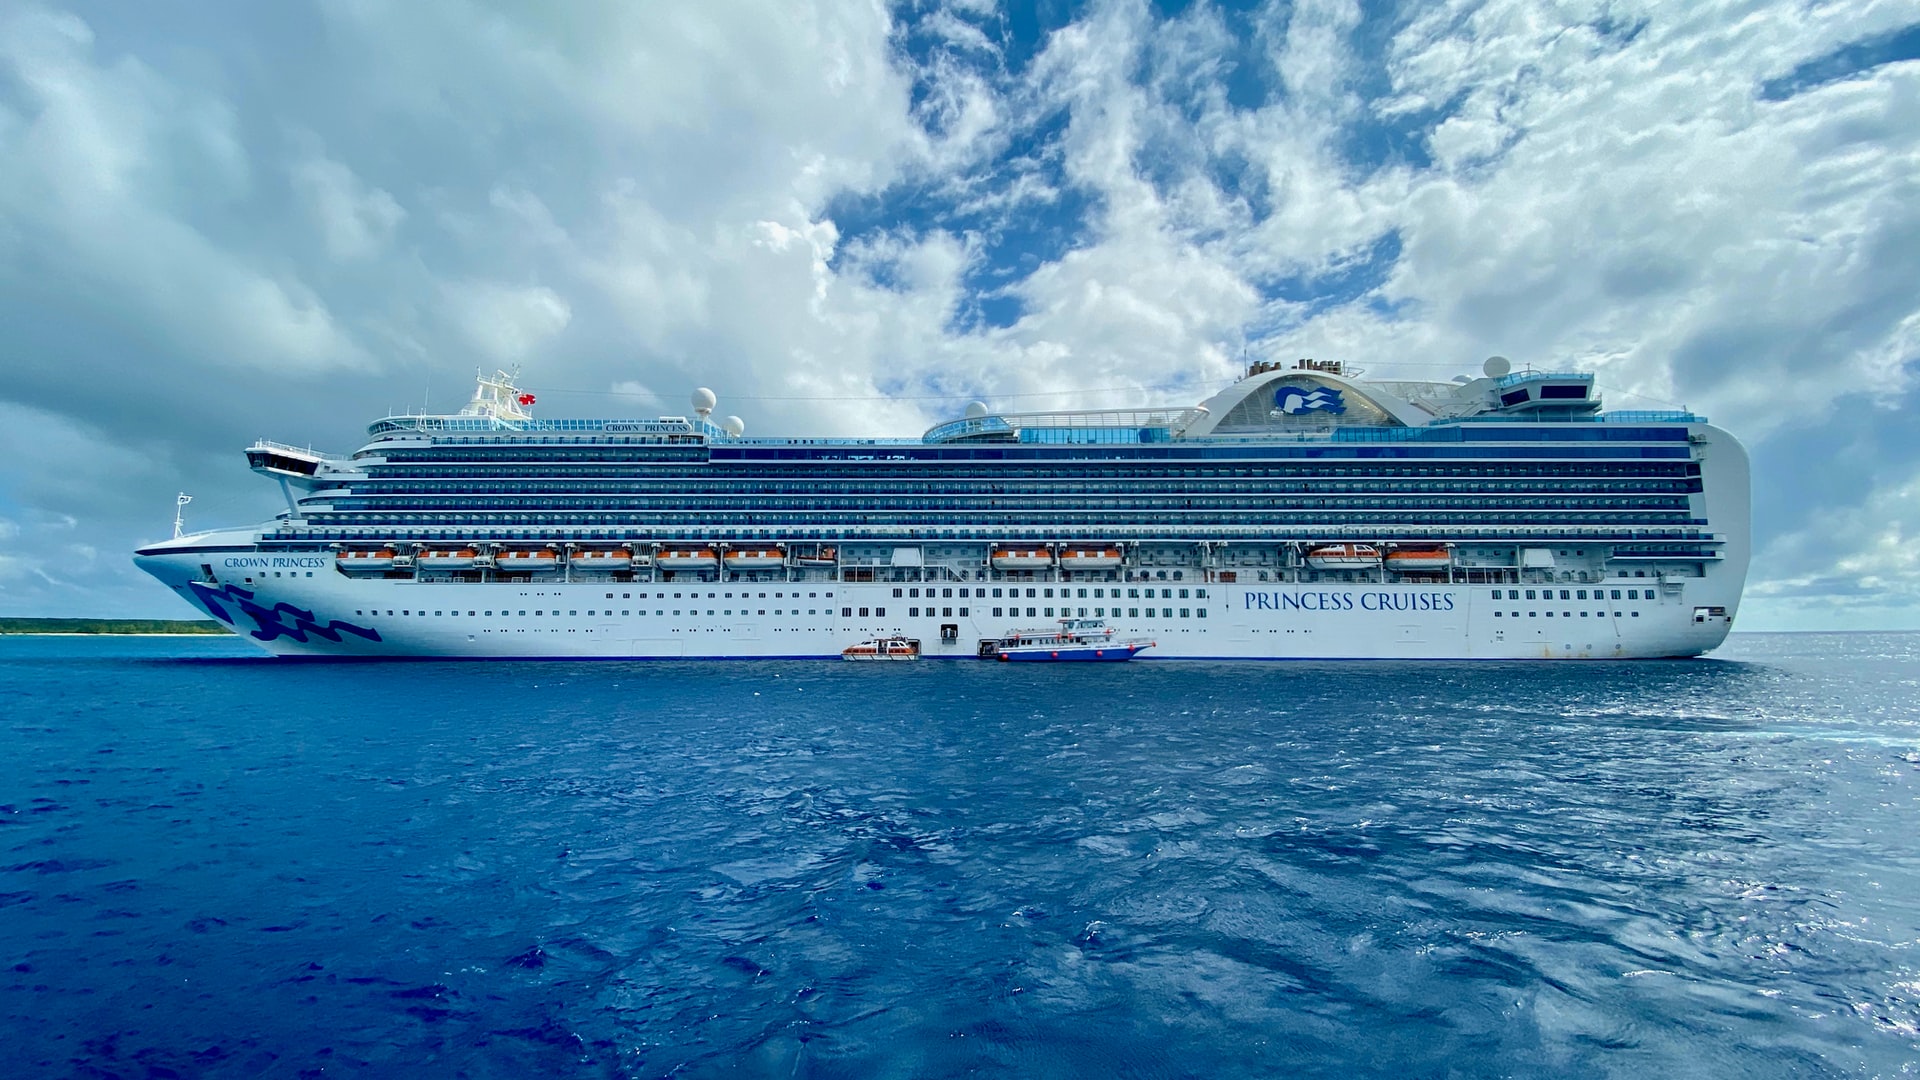 Symphony of the seas , 10 largest cruise ship in the world 2022